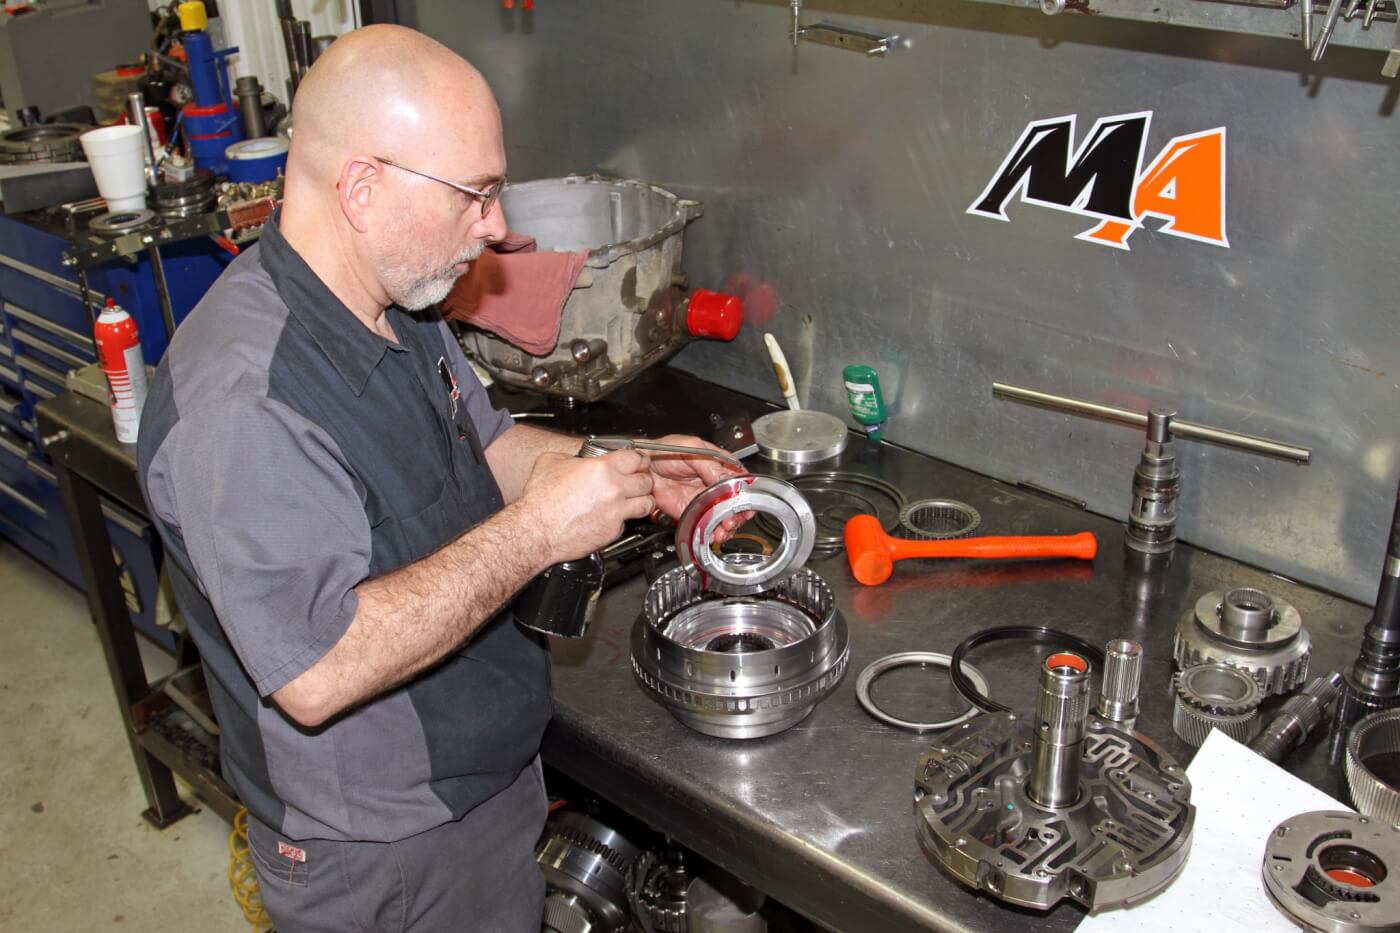 11. When reassembling an Allison transmission the team at Merchant Automotive uses all new seals, gaskets and select bushings to bring the transmission back to a better than new state. Delo lubricates the O-ring seals before installing the components to prevent them from ripping or tearing and creating an internal fluid leak in the hydraulic system.